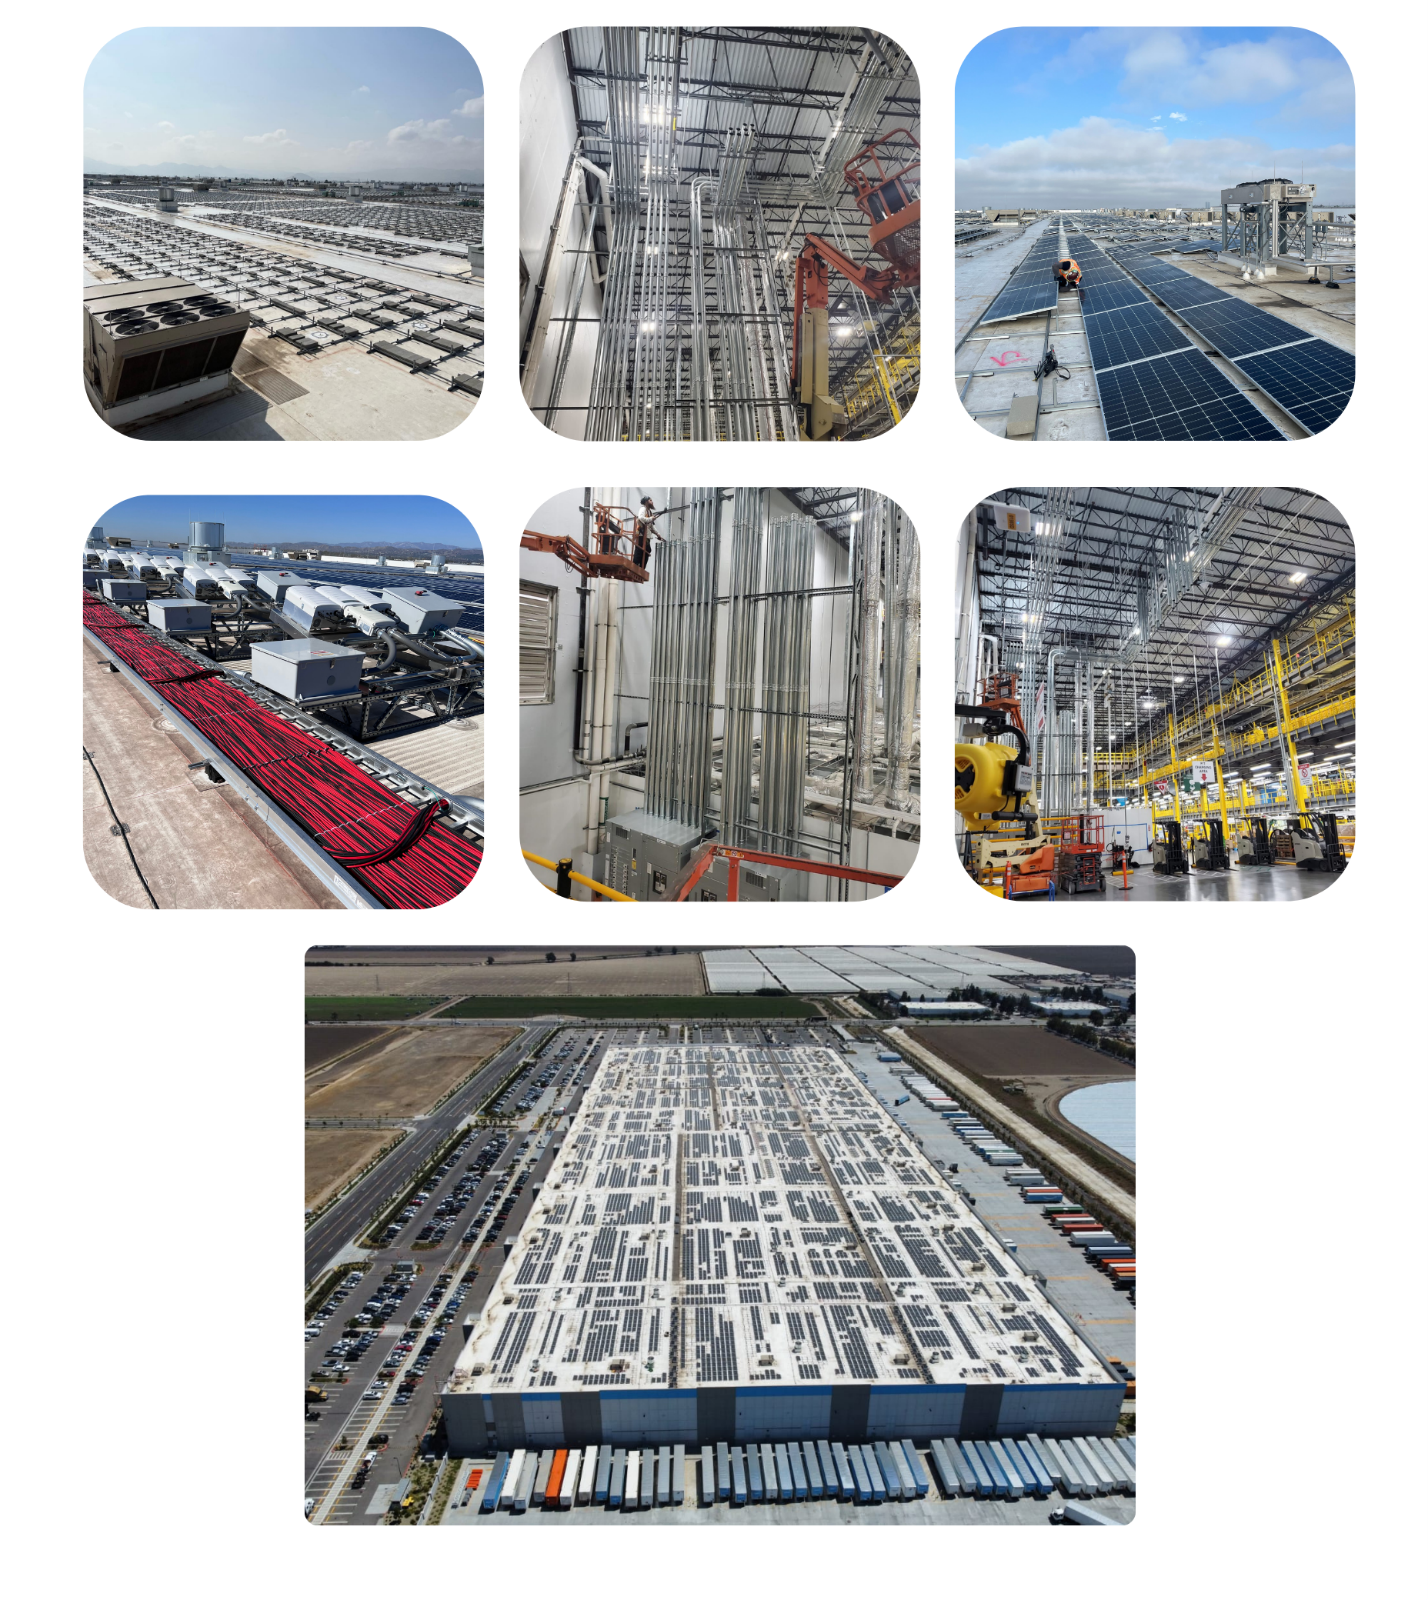 A collage of several images of a factory

Description automatically generated